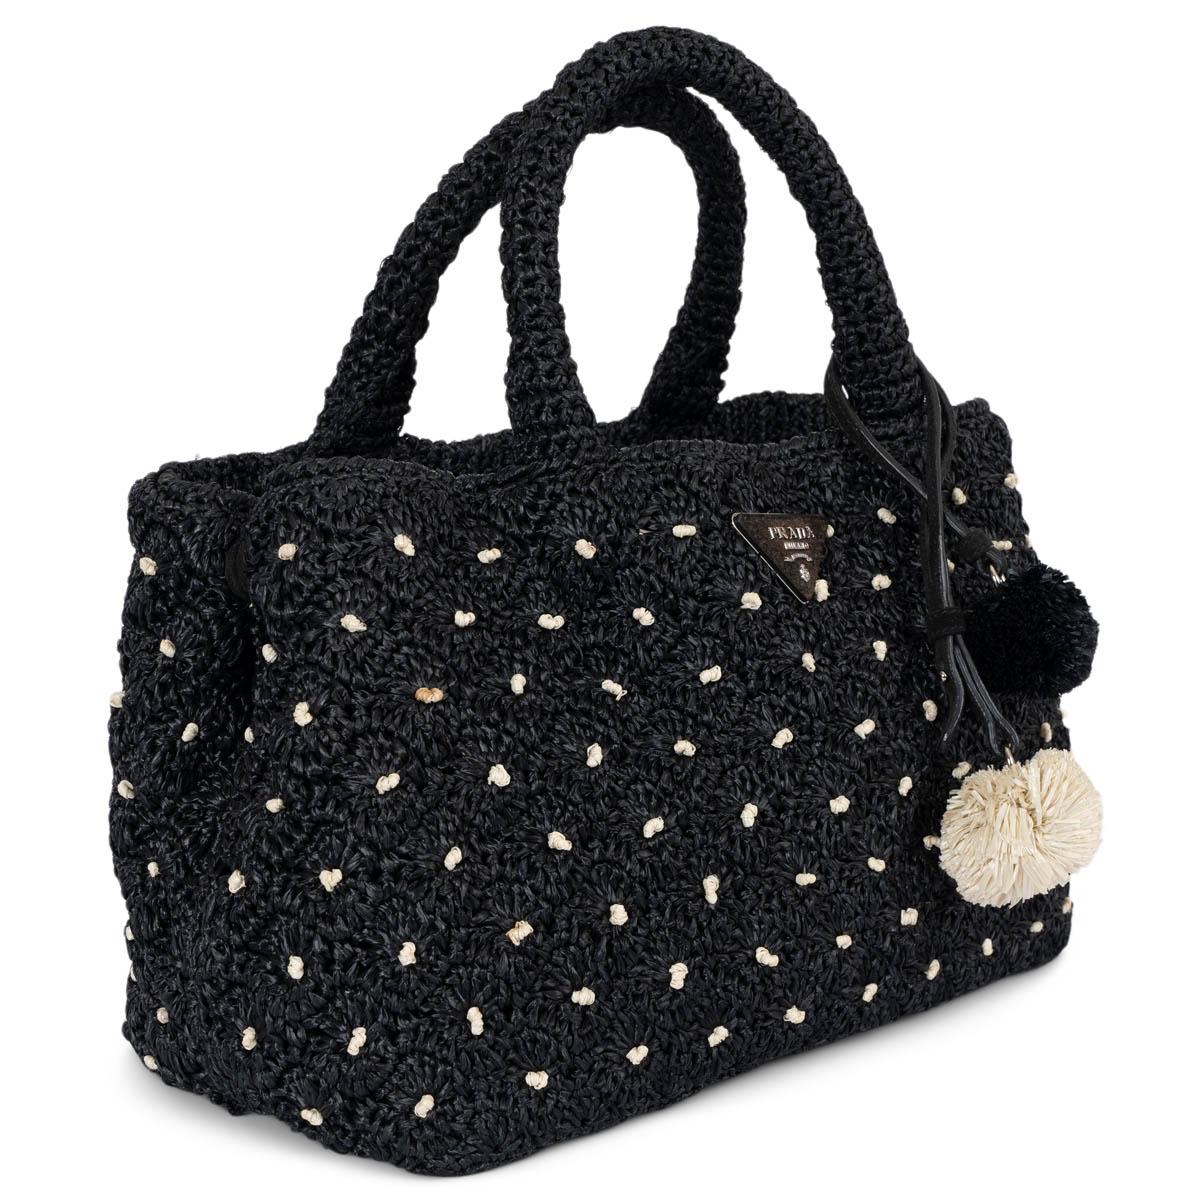 100% authentic Prada Small Canapa tote bag in black and white Raffia Pois. The design features an open top and is lined in black canvas with one zipper pocket against the back and one open pocket against the front, a detachable canvas shoulder-strap